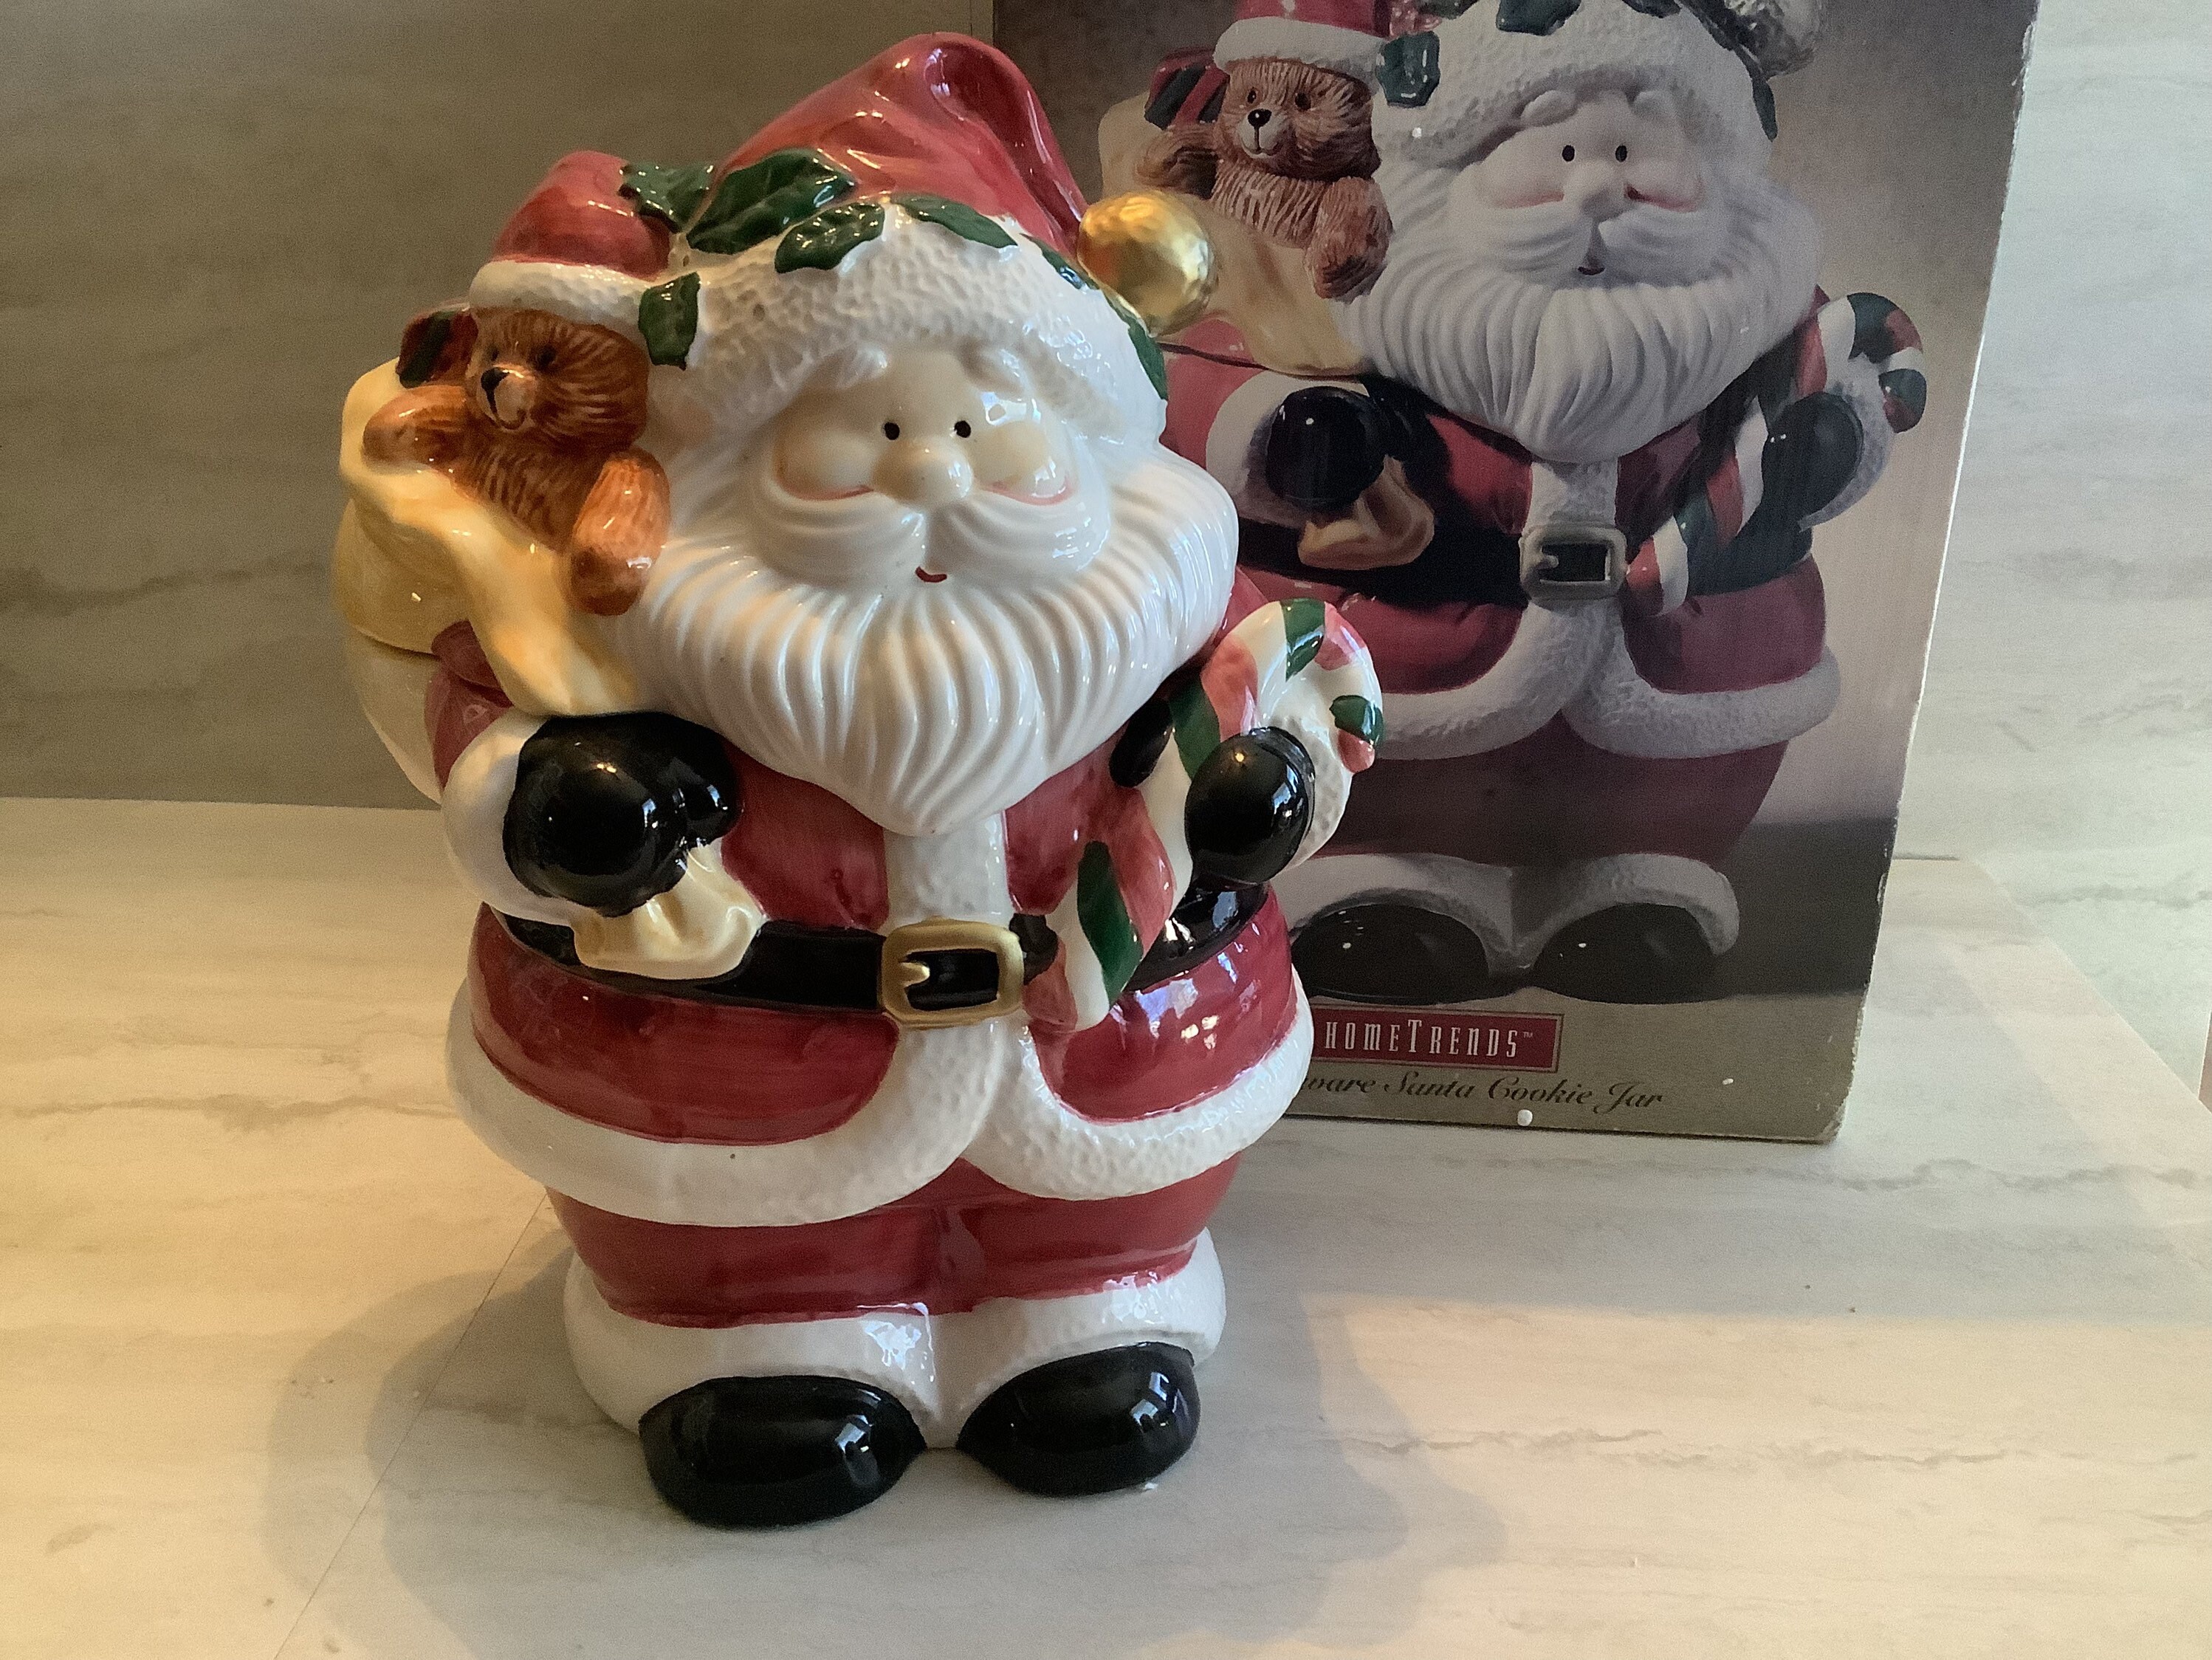 OSALADI Christmas Cookie Jars Santa Claus Candy Jar Glass Food Storage  Canisters Xmas Treat Container Tea Can with Lid for Kitchen Counter Holiday